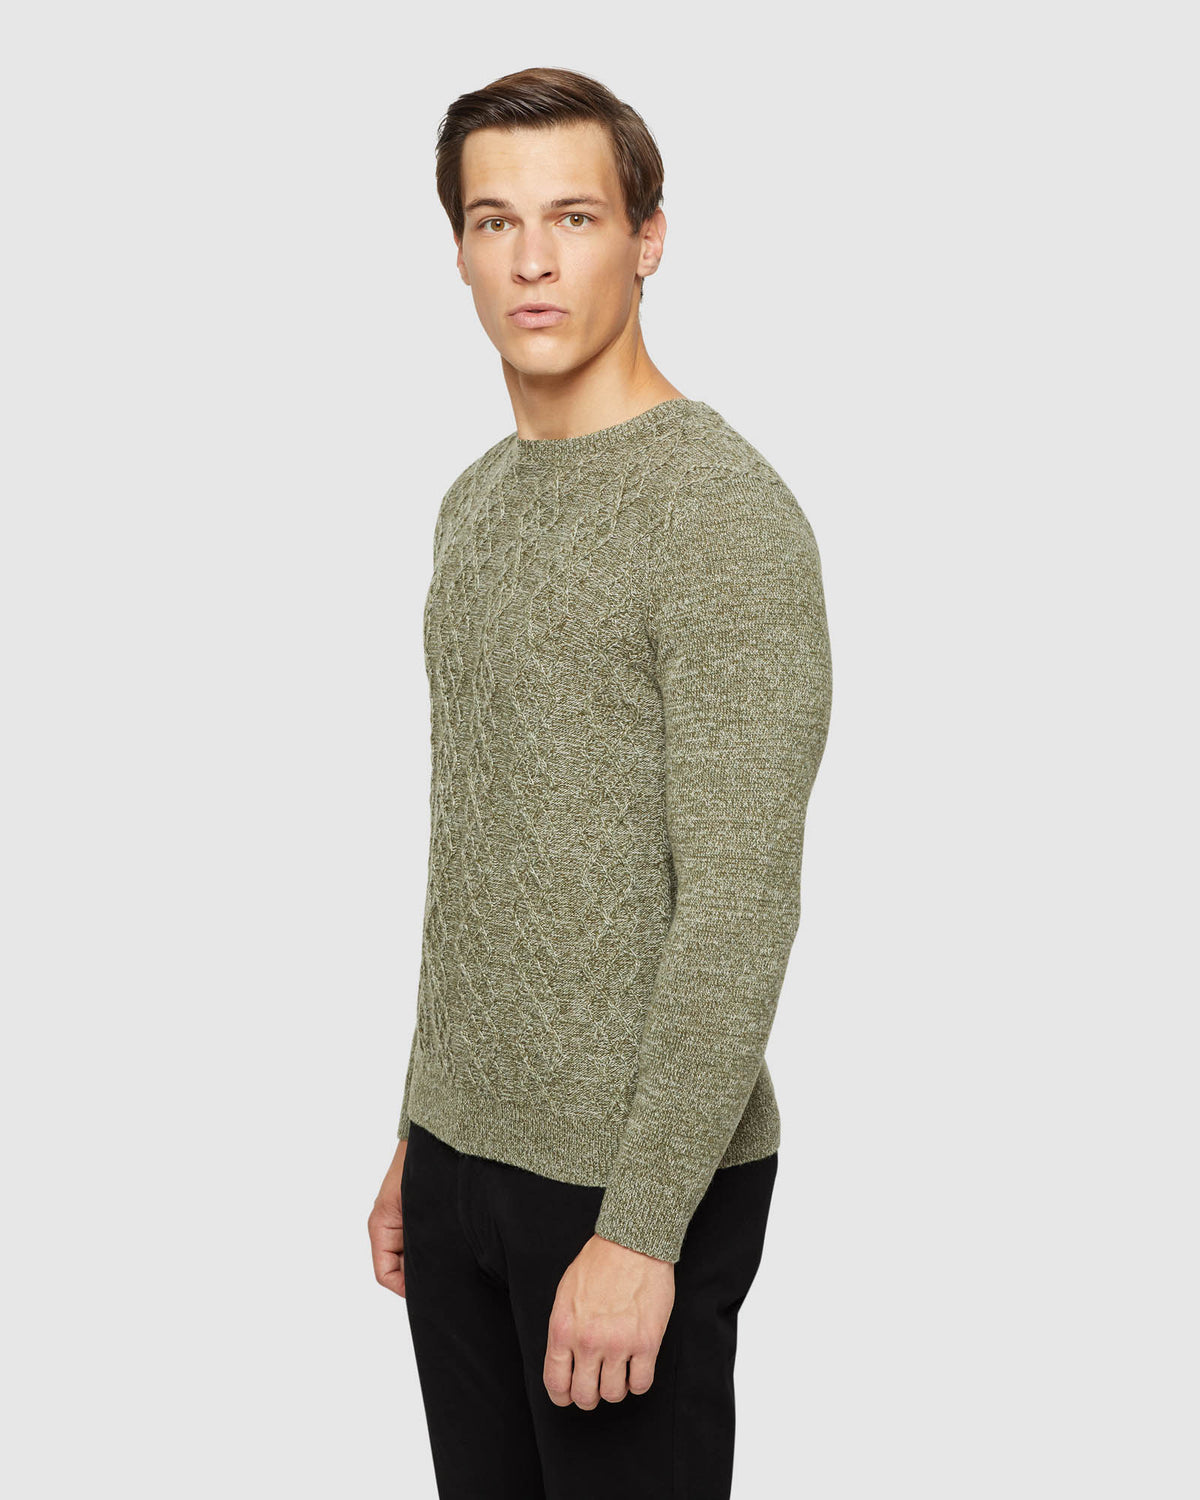 REX CABLE KNIT MENS KNITWEAR